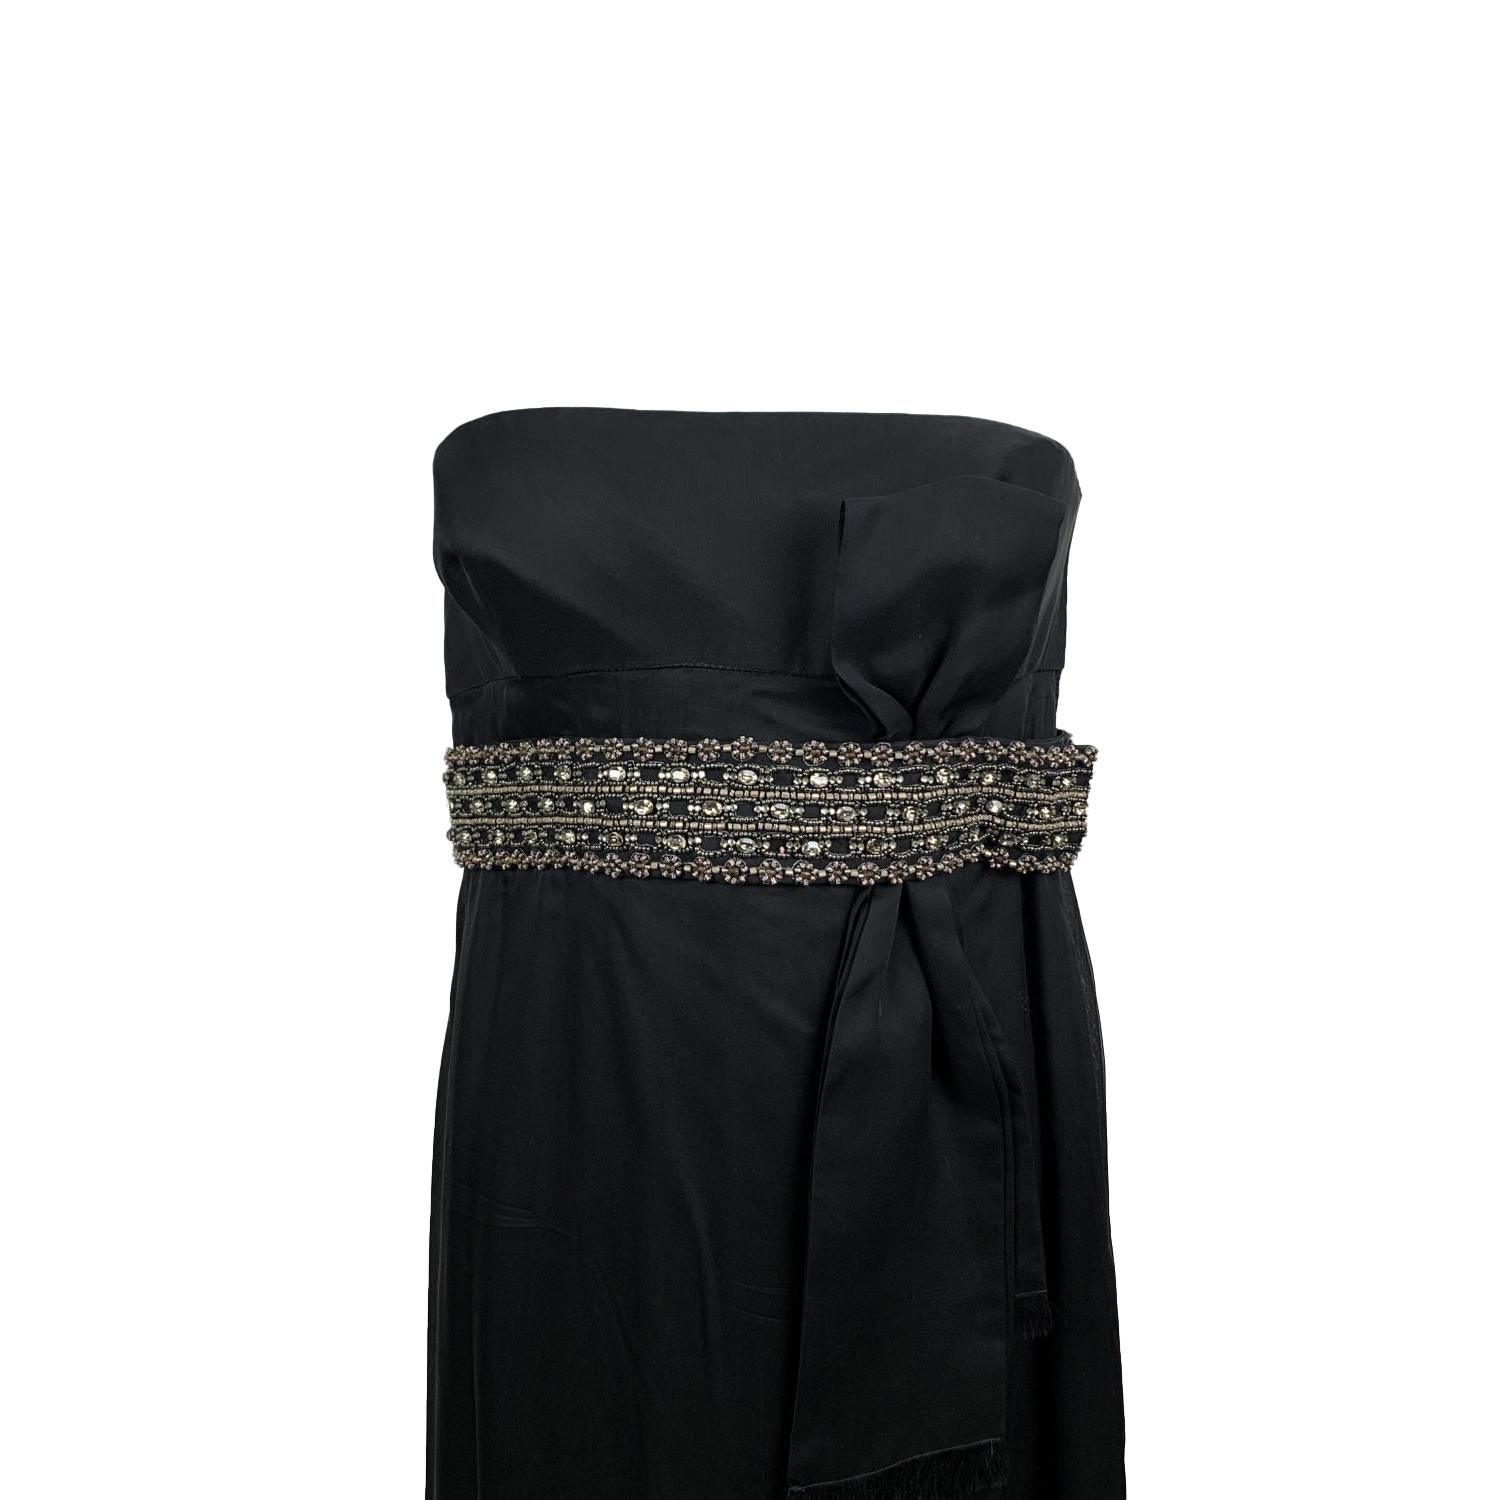 Stunning Valentino bustier black silk gown from the 2008 winter collection. The dress features a jeweled and beaded embelished waist belt (not removable) with bow detailing. Strapless design with built-in bra. Side zip closure. Composition: 100%